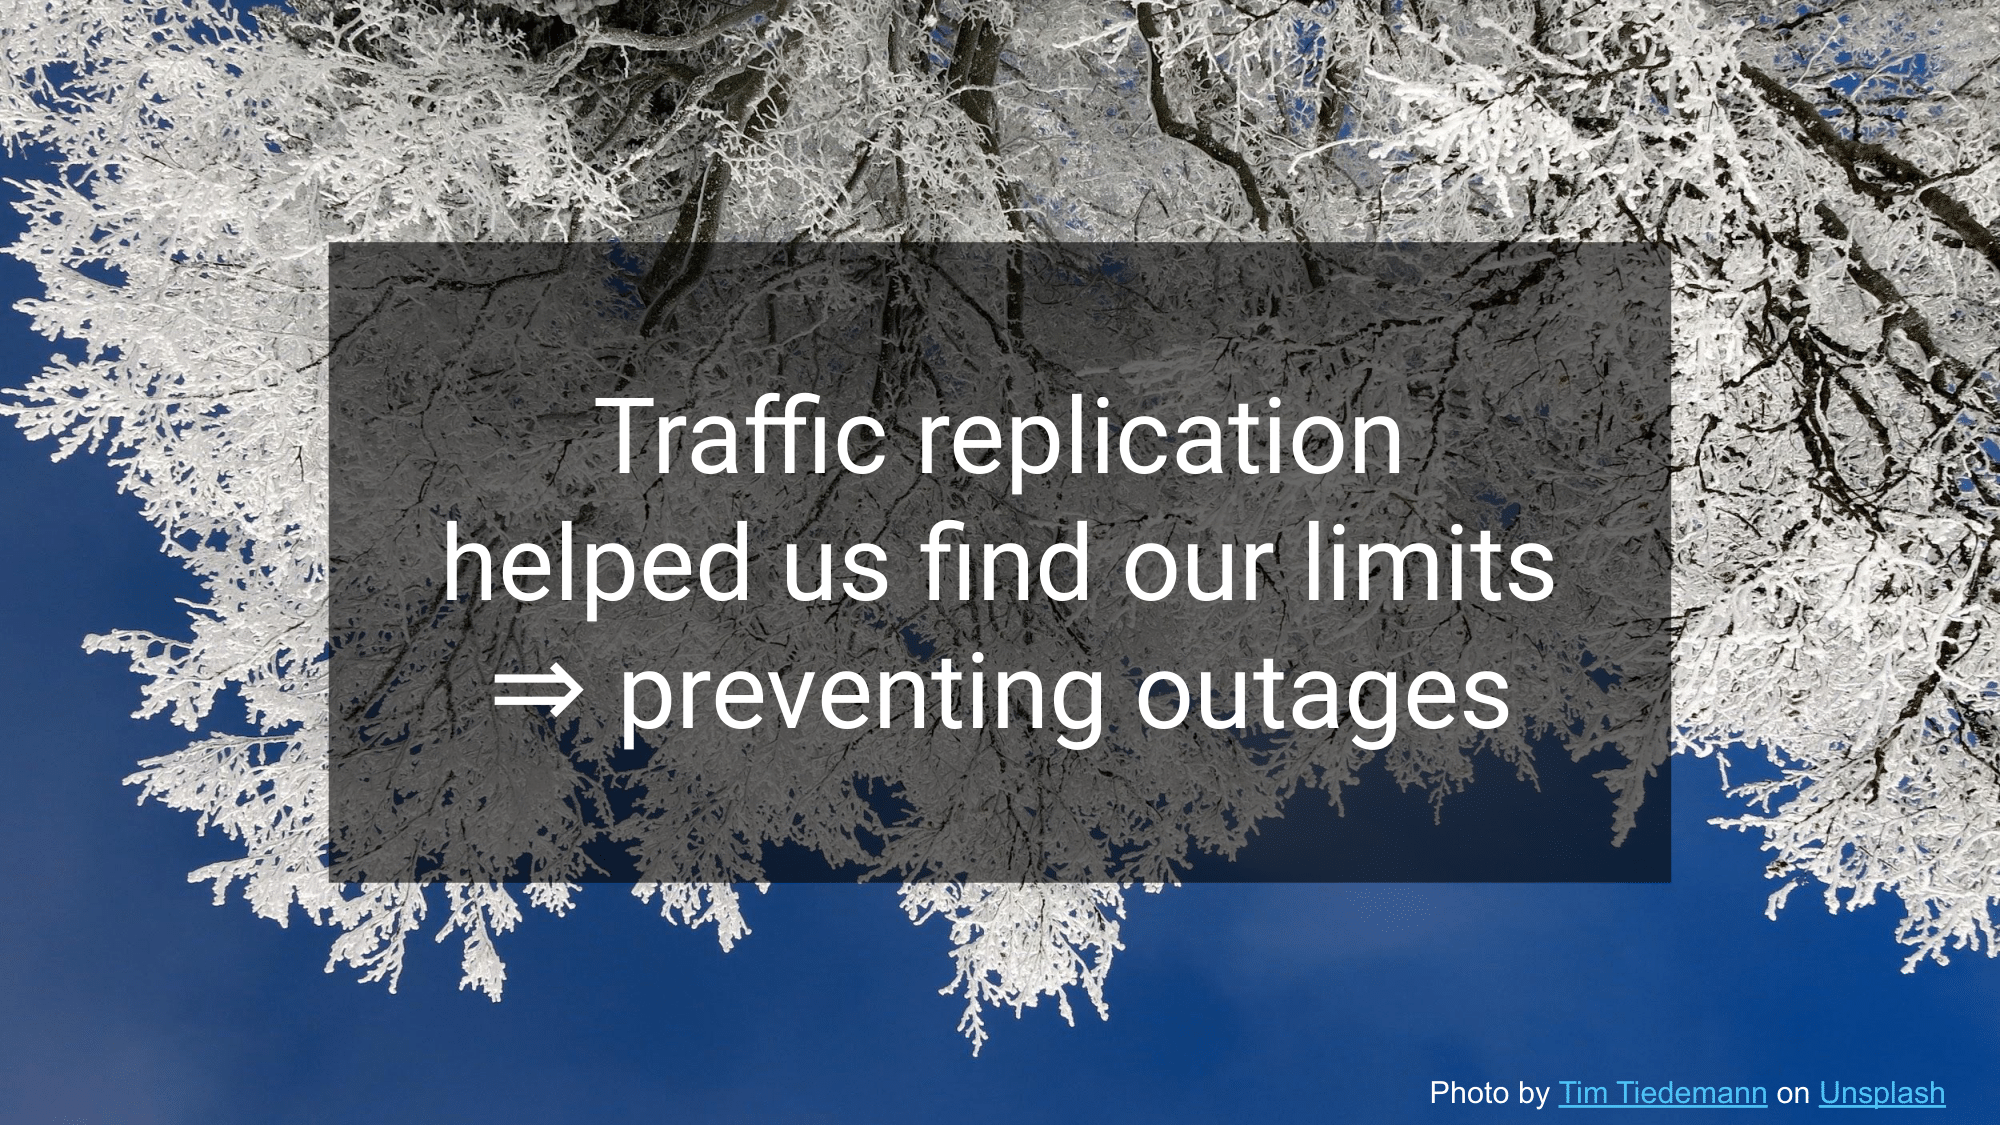 53.-traffic-replication-helped-us-find-our-limits-preventing-outages